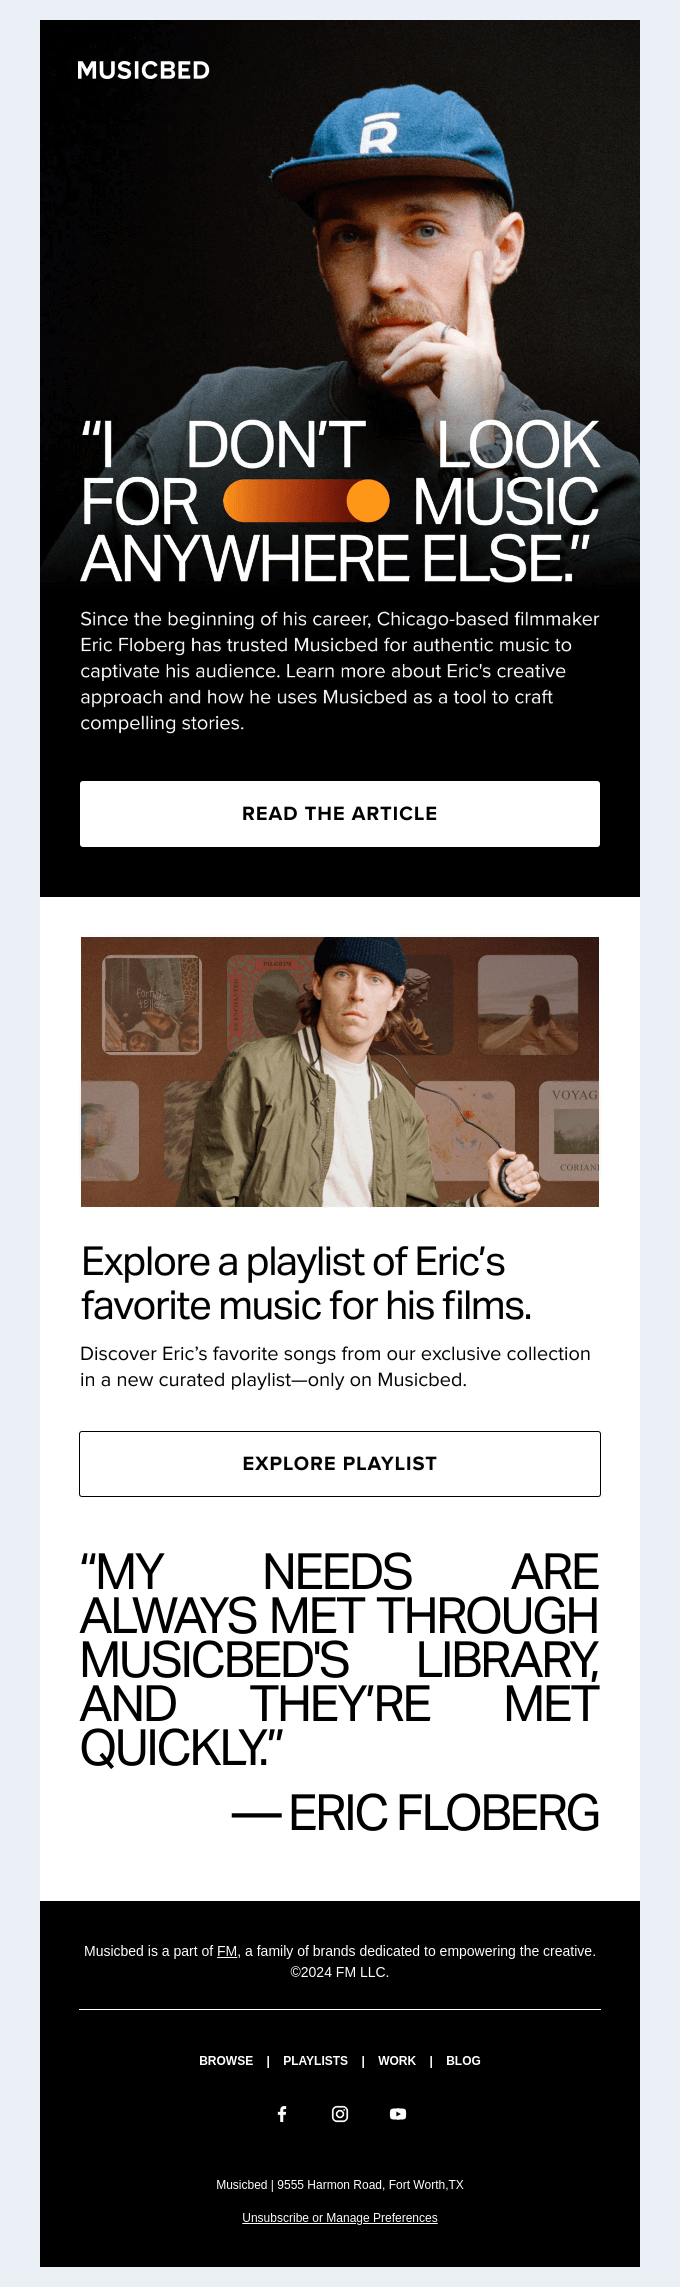 "I don't look for music anywhere else" (Eric Floberg said that)